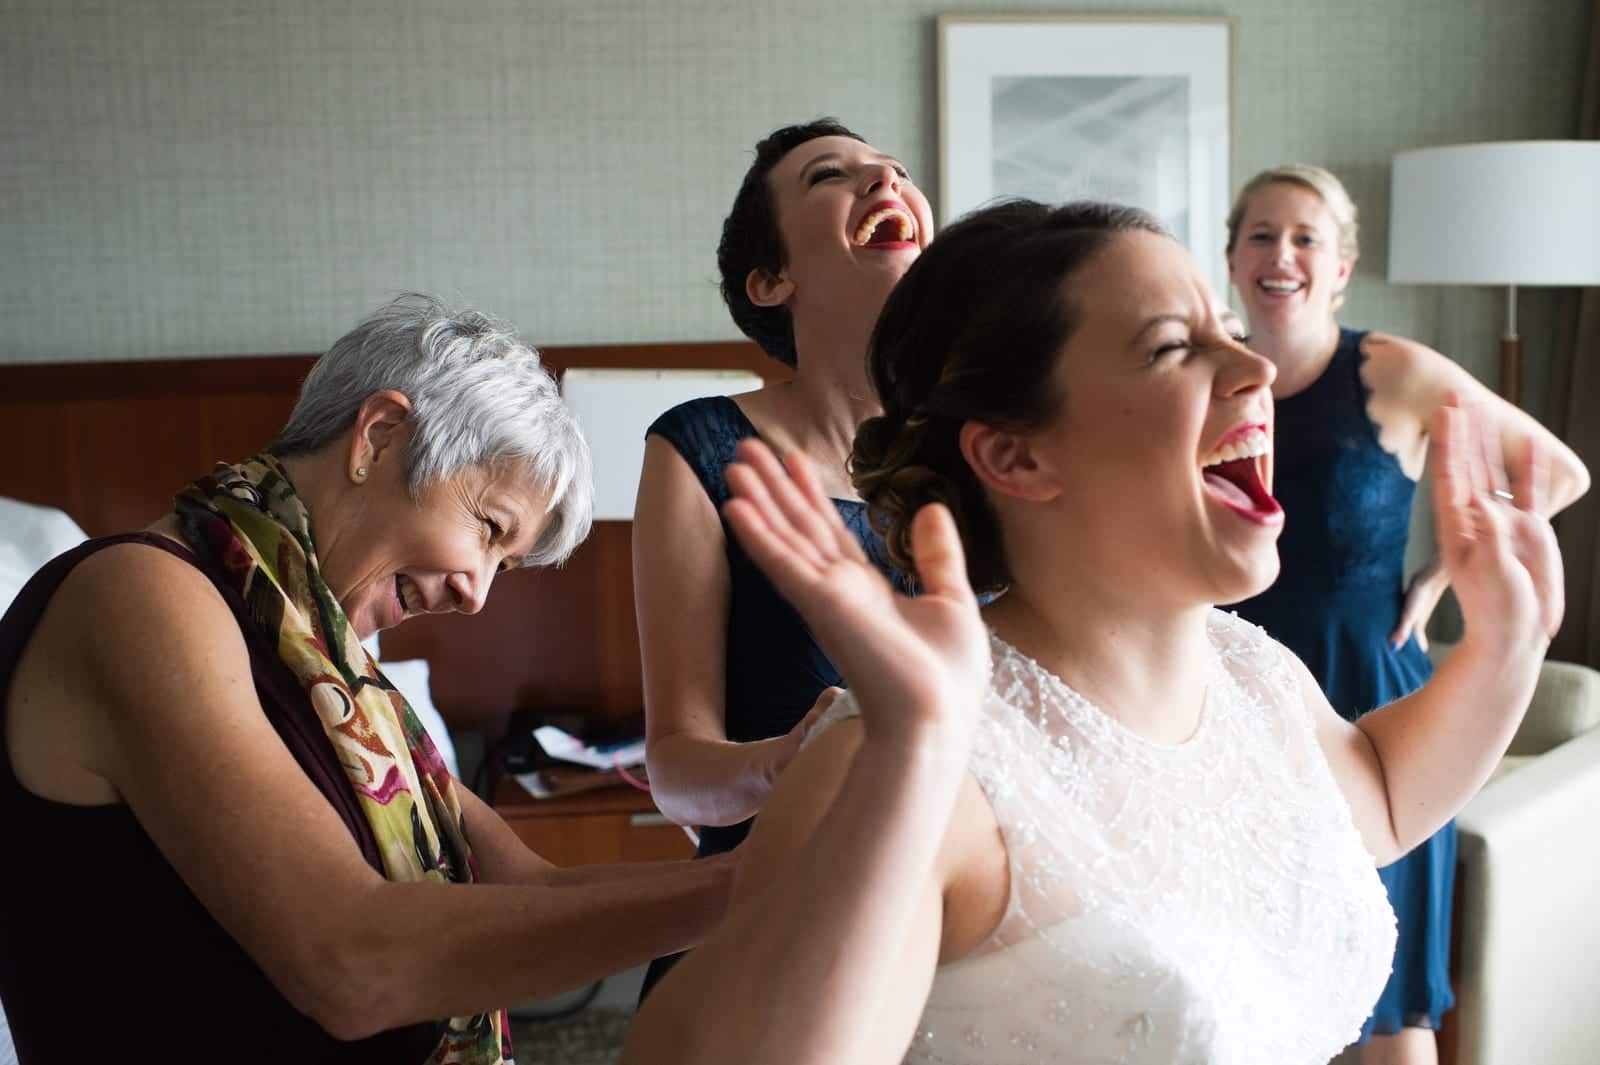 A bride holds her hands in the air and laughs as her mother buttons up her wedding dress. The mother laughs too, as do the two bridesmaids behind them.